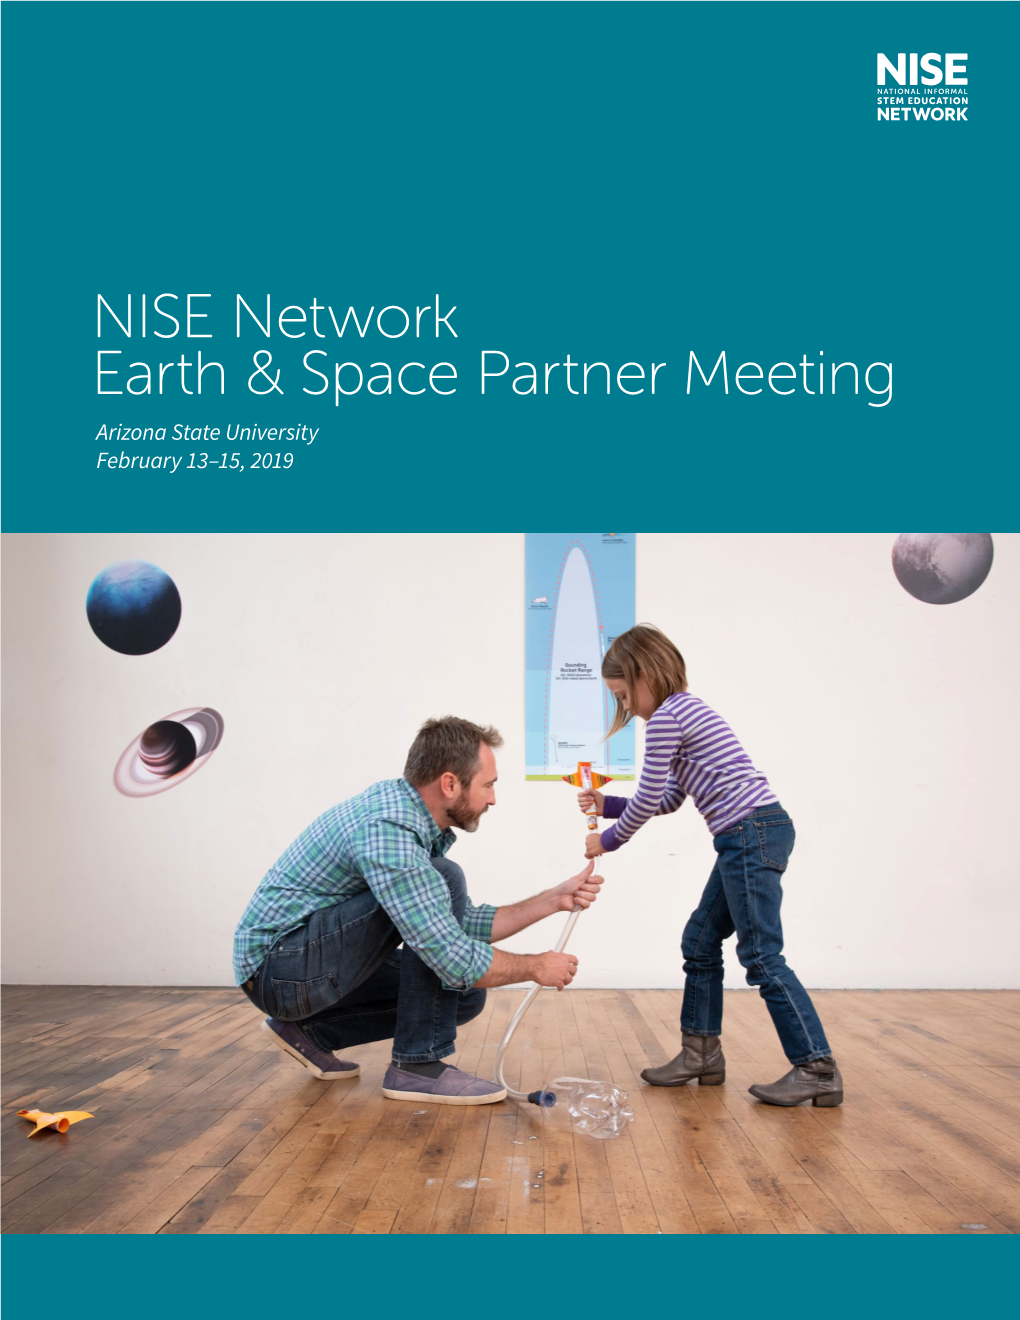 NISE Network Earth & Space Partner Meeting